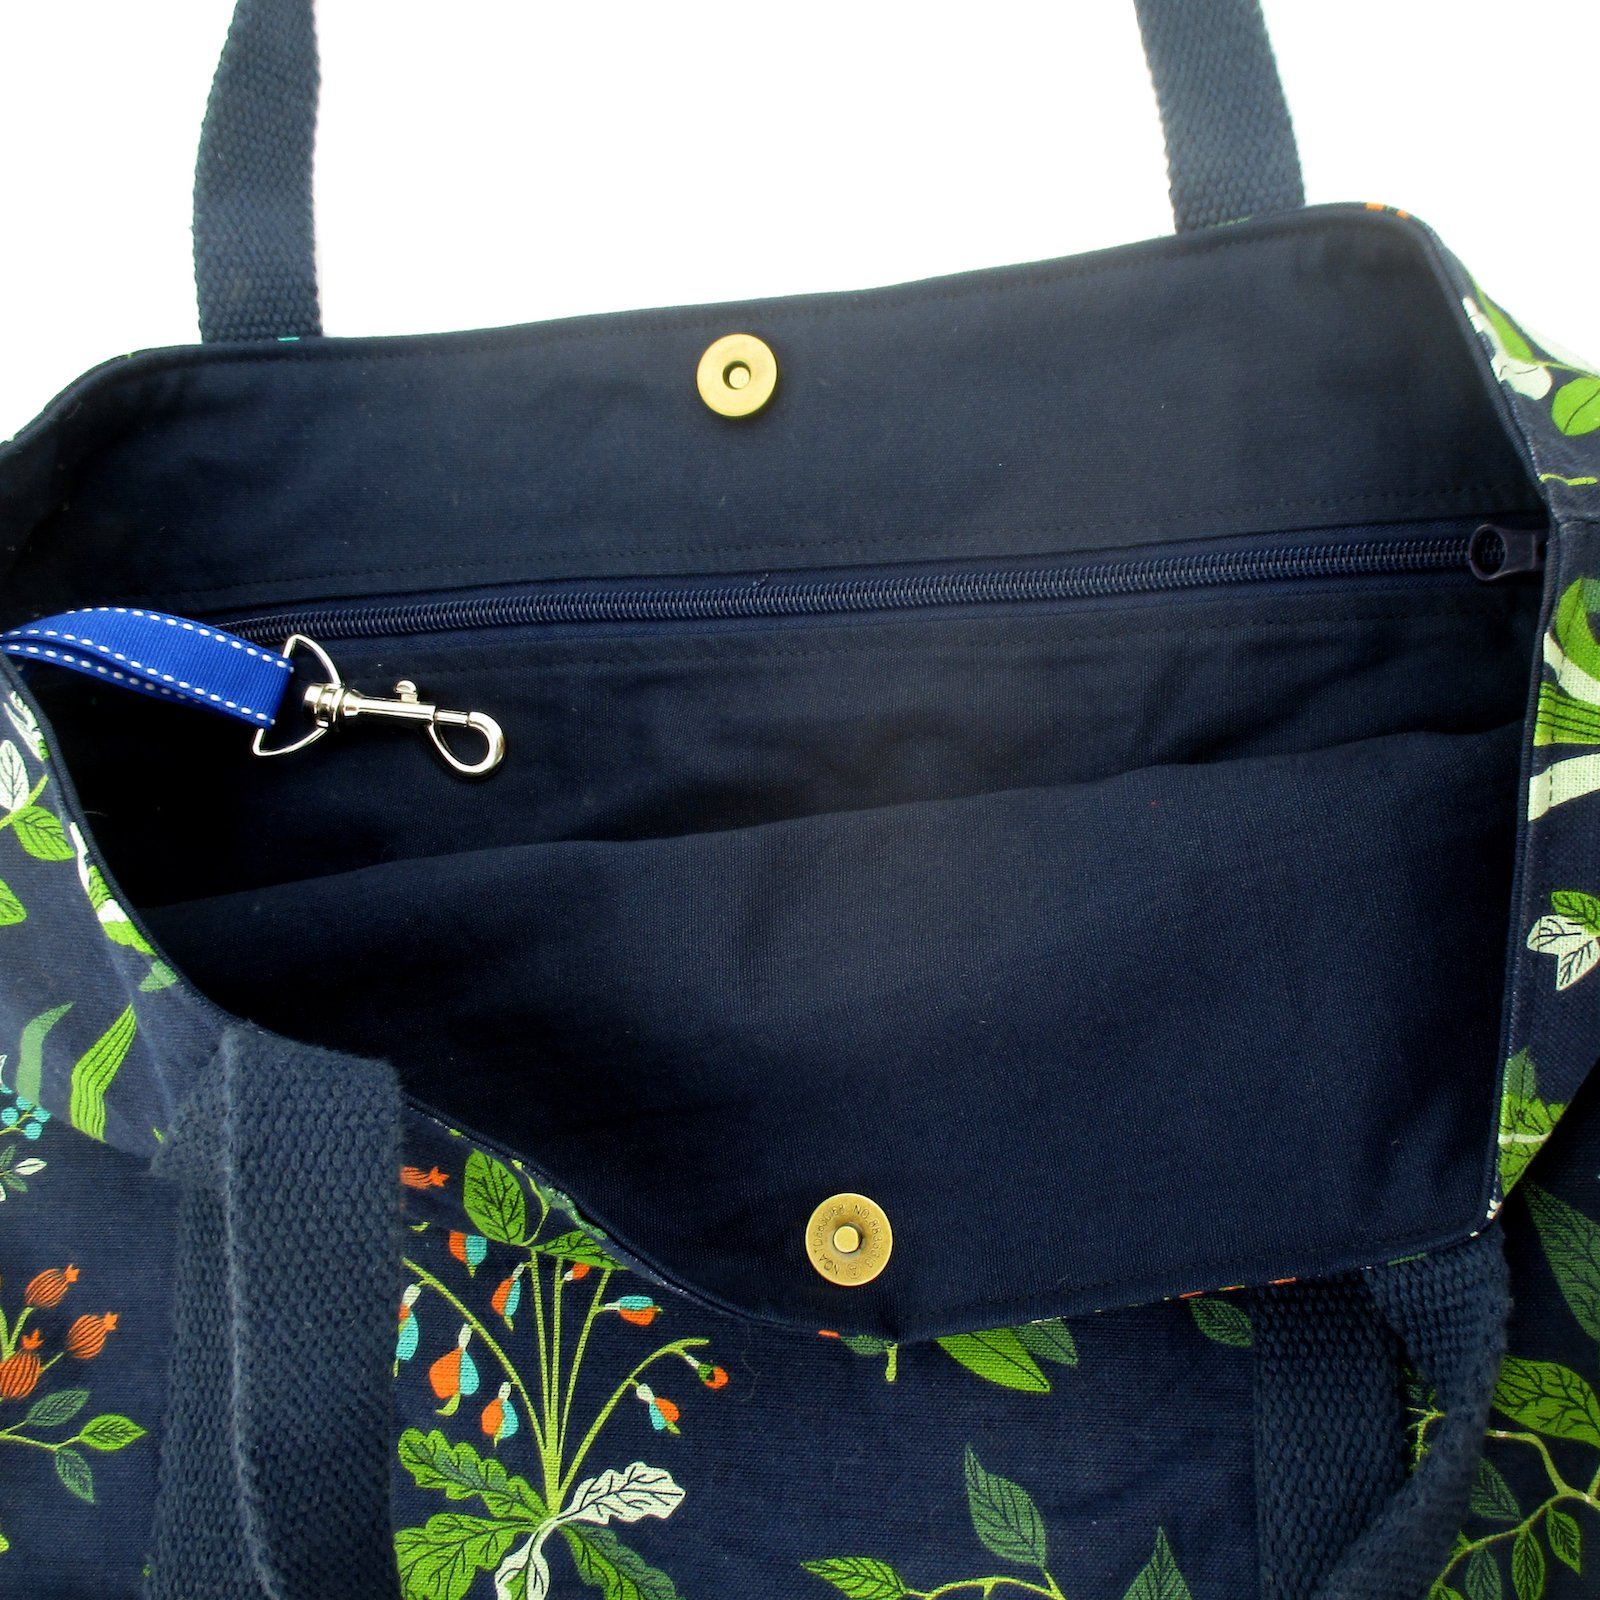 Floral Leaves All Over Print Market Wide Tote Bag with Zip Pocket in Blue